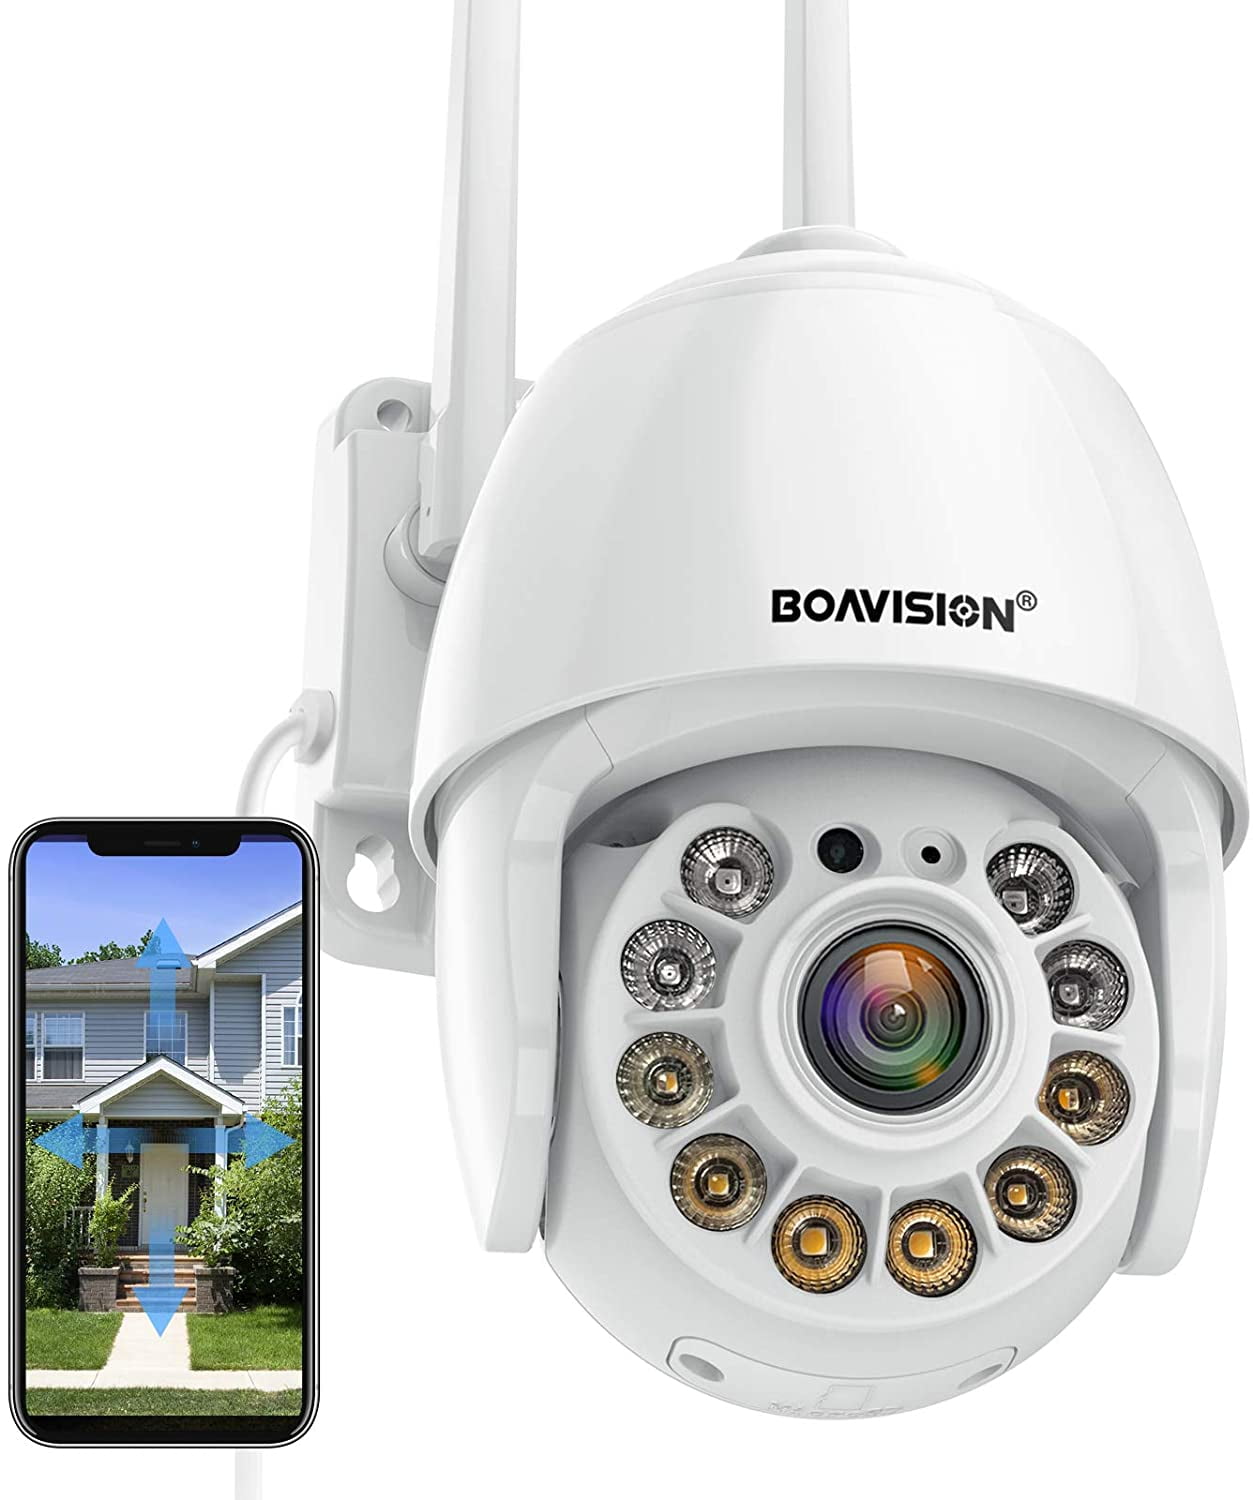 2x High Definition All Weather NightVision CCTV Security Camera for Surveillance 